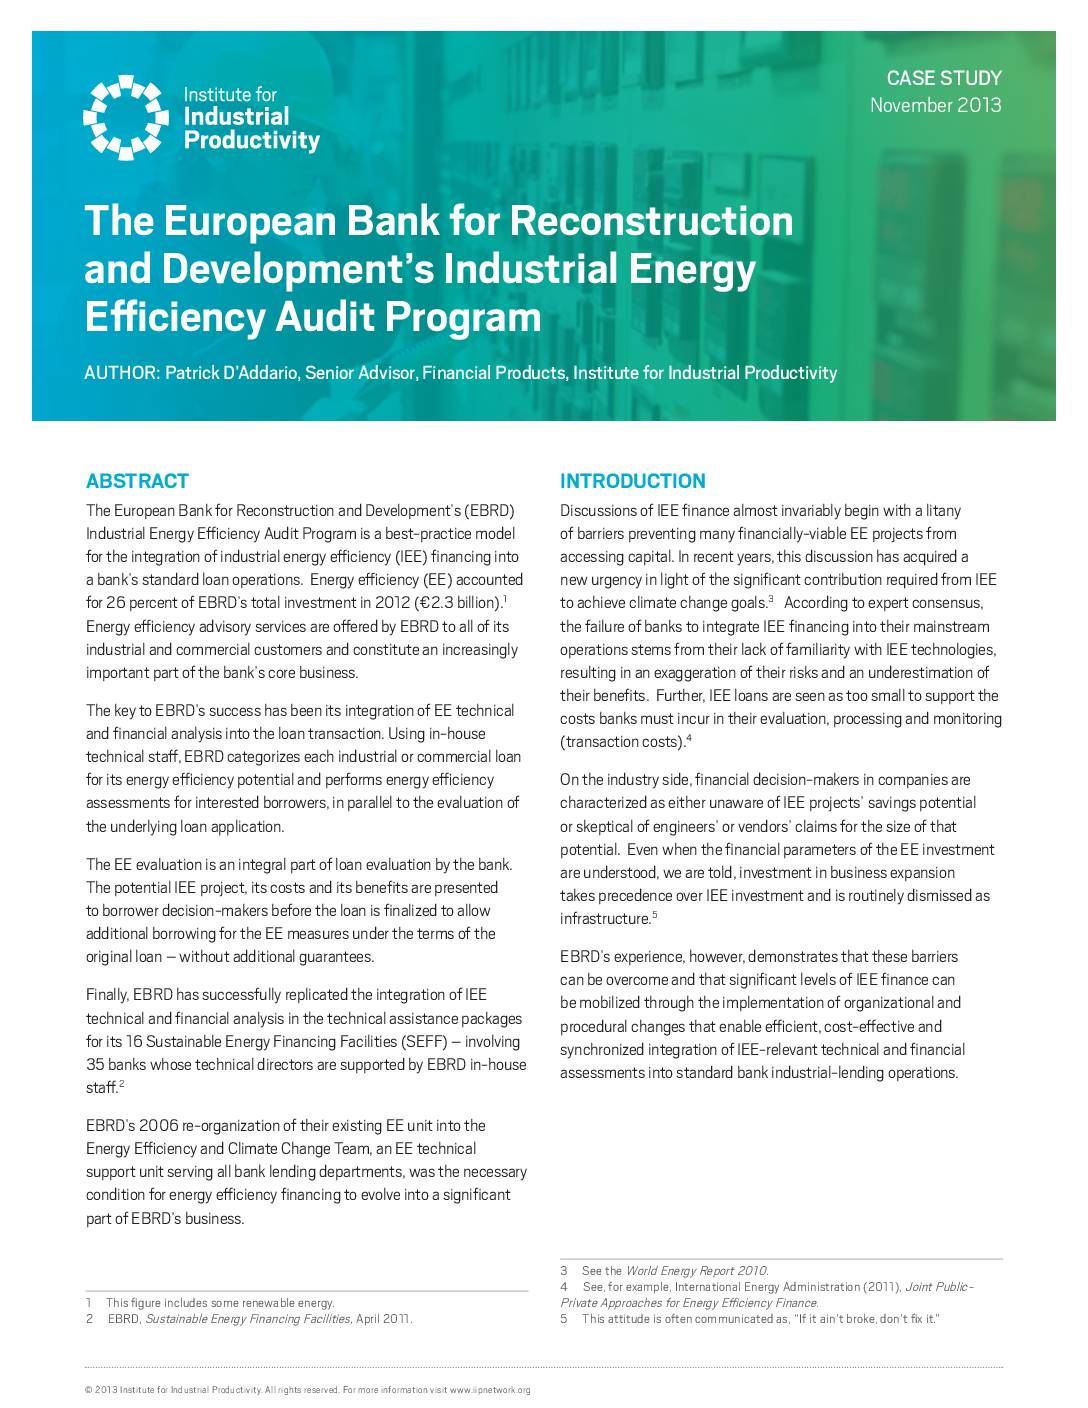 The European Bank for Reconstruction and Development’s Industrial Energy Efficiency Audit Program